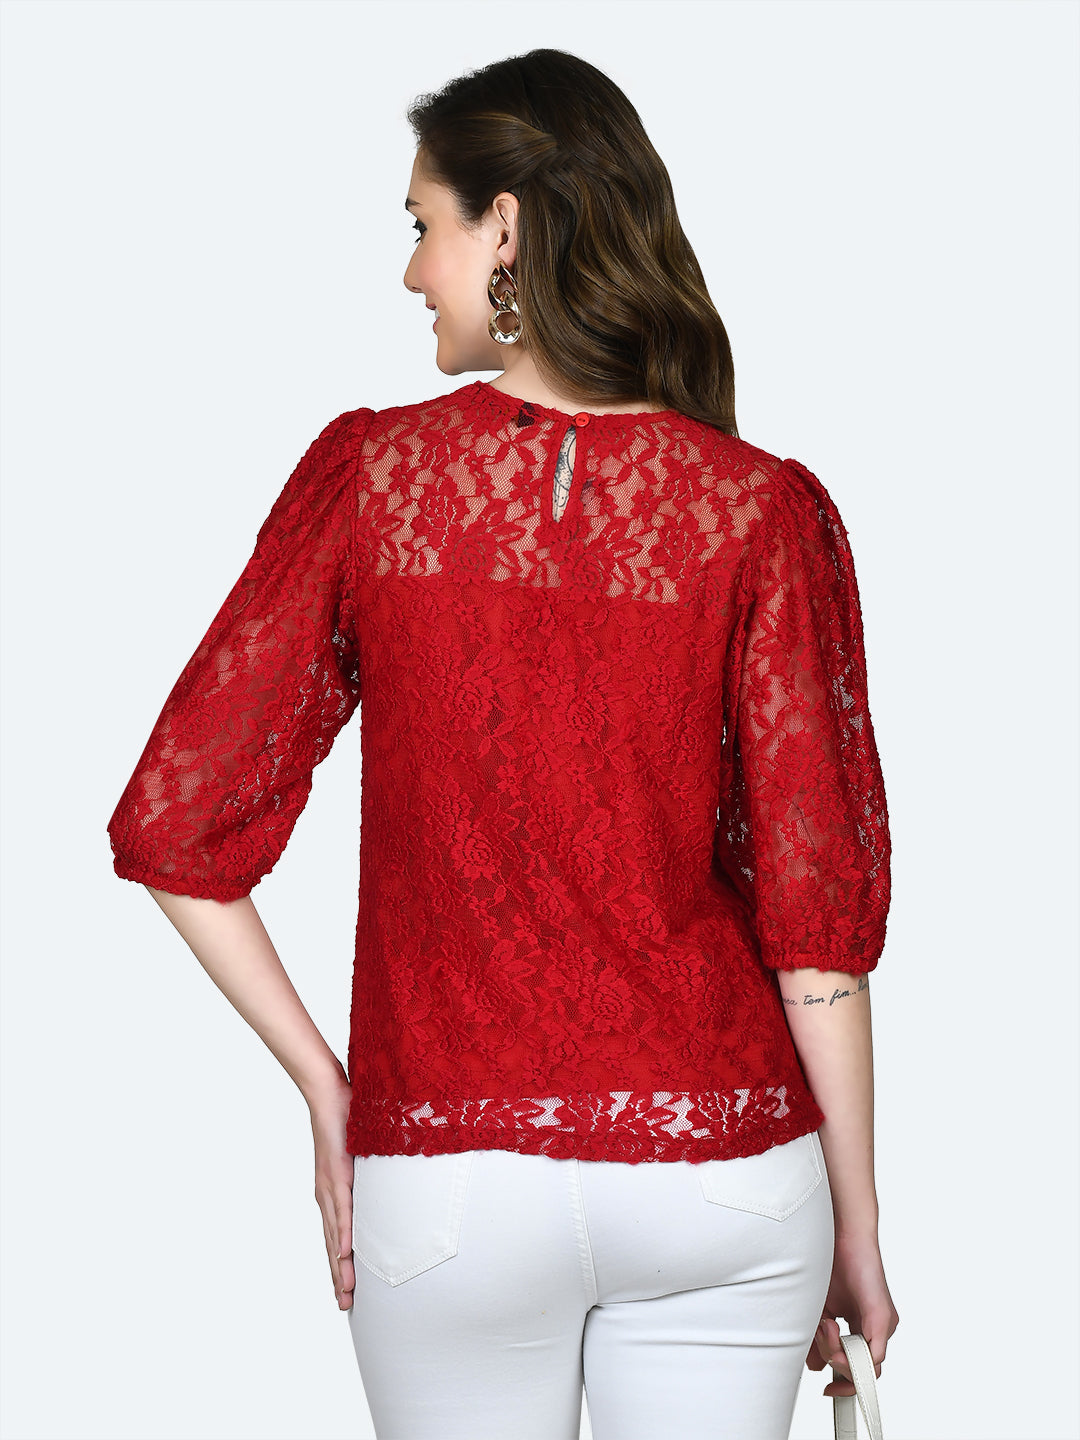 Red Lace Top For Women